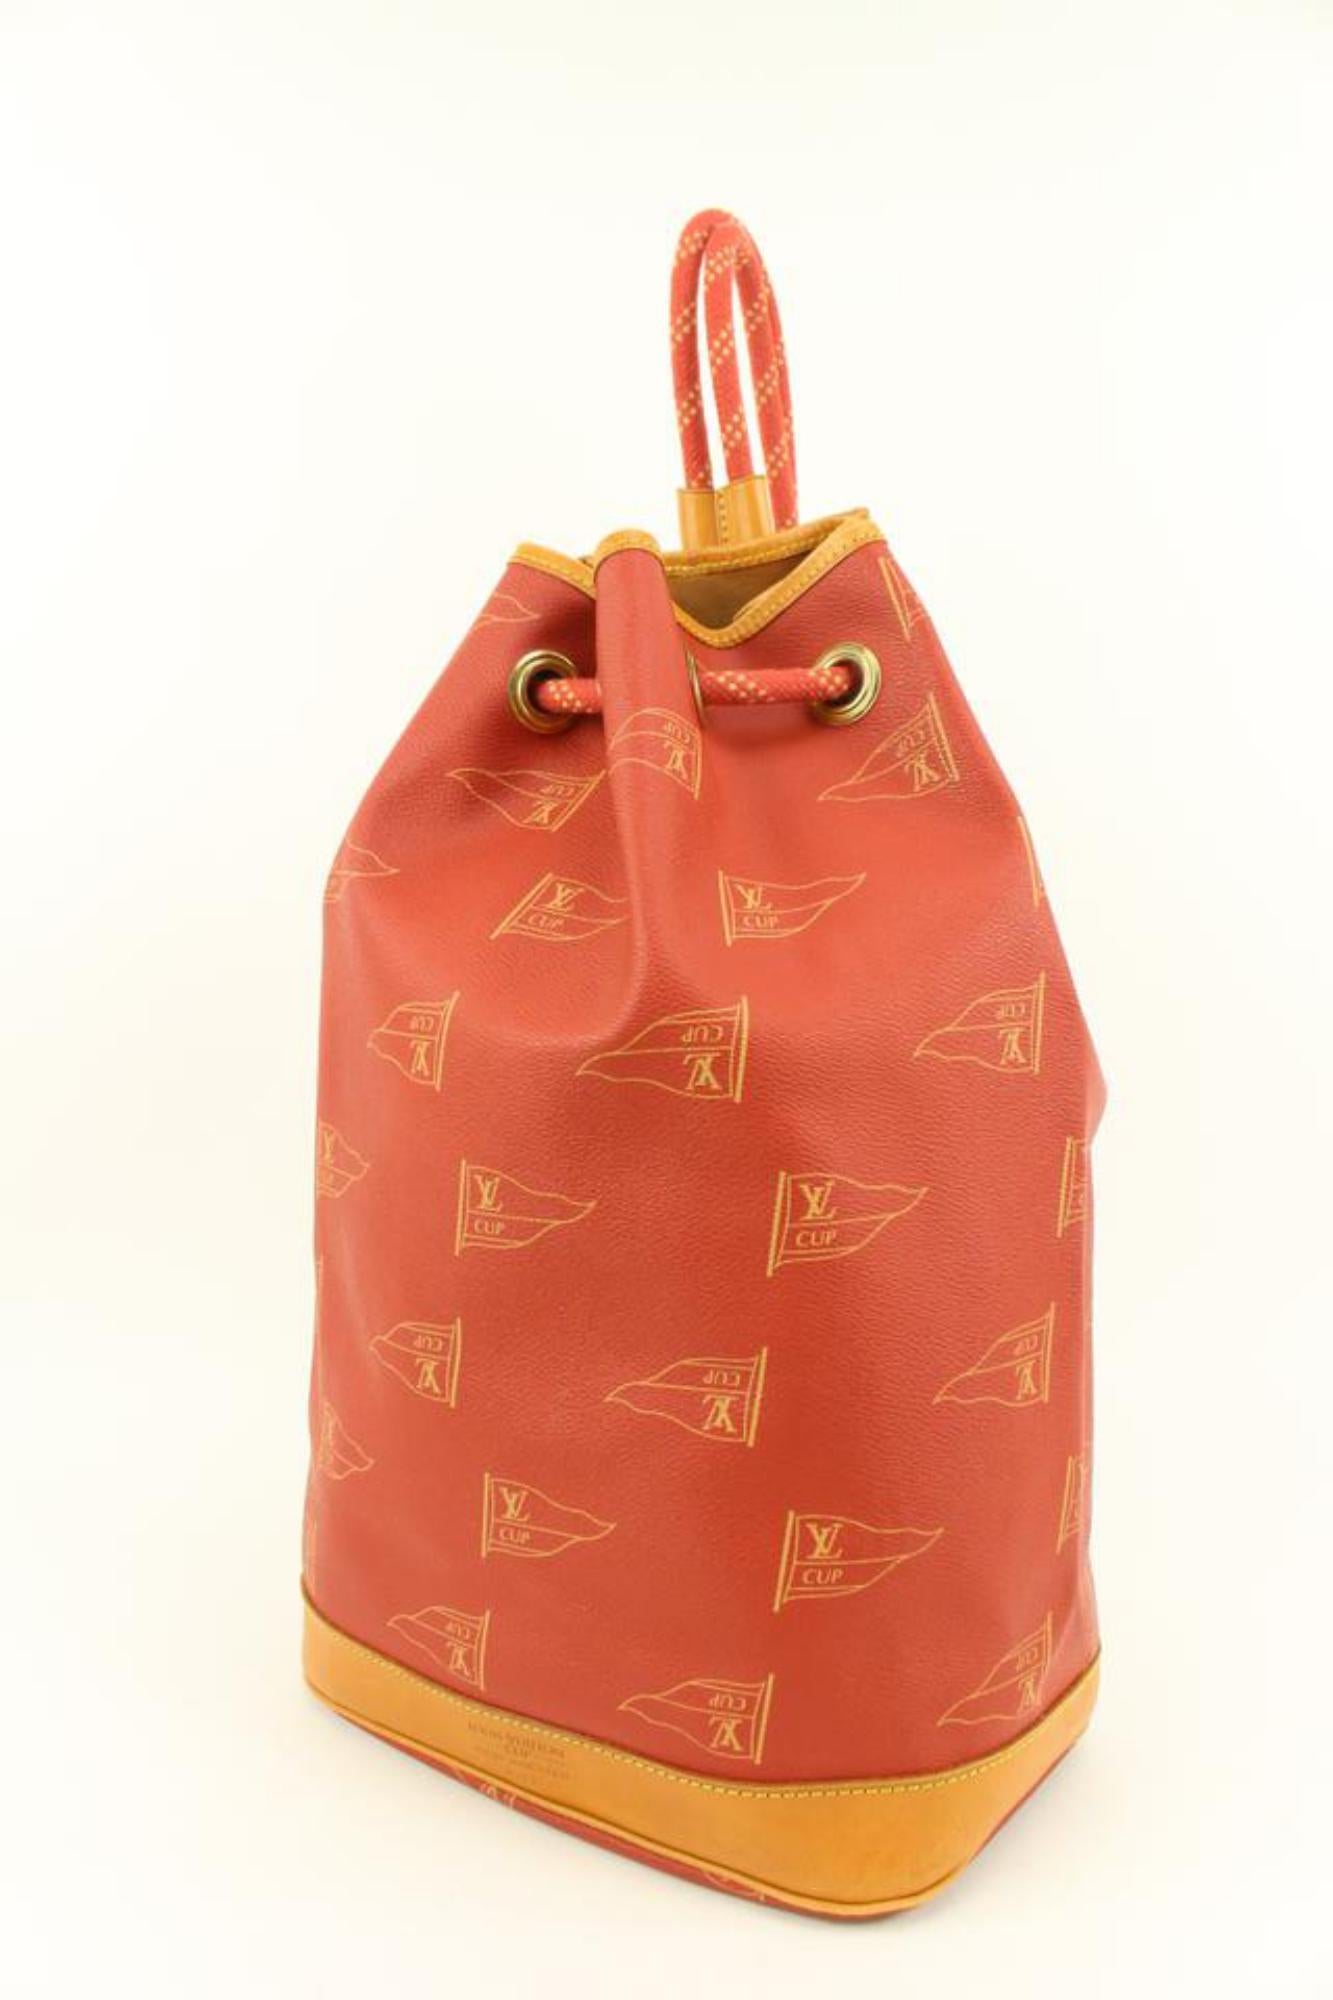 Louis Vuitton 1995 Red LV Cup Saint Tropez Drawstring Bucket Hobo Bag 63lk38s
Date Code/Serial Number: SP0974
Made In: France
Measurements: Length:  16